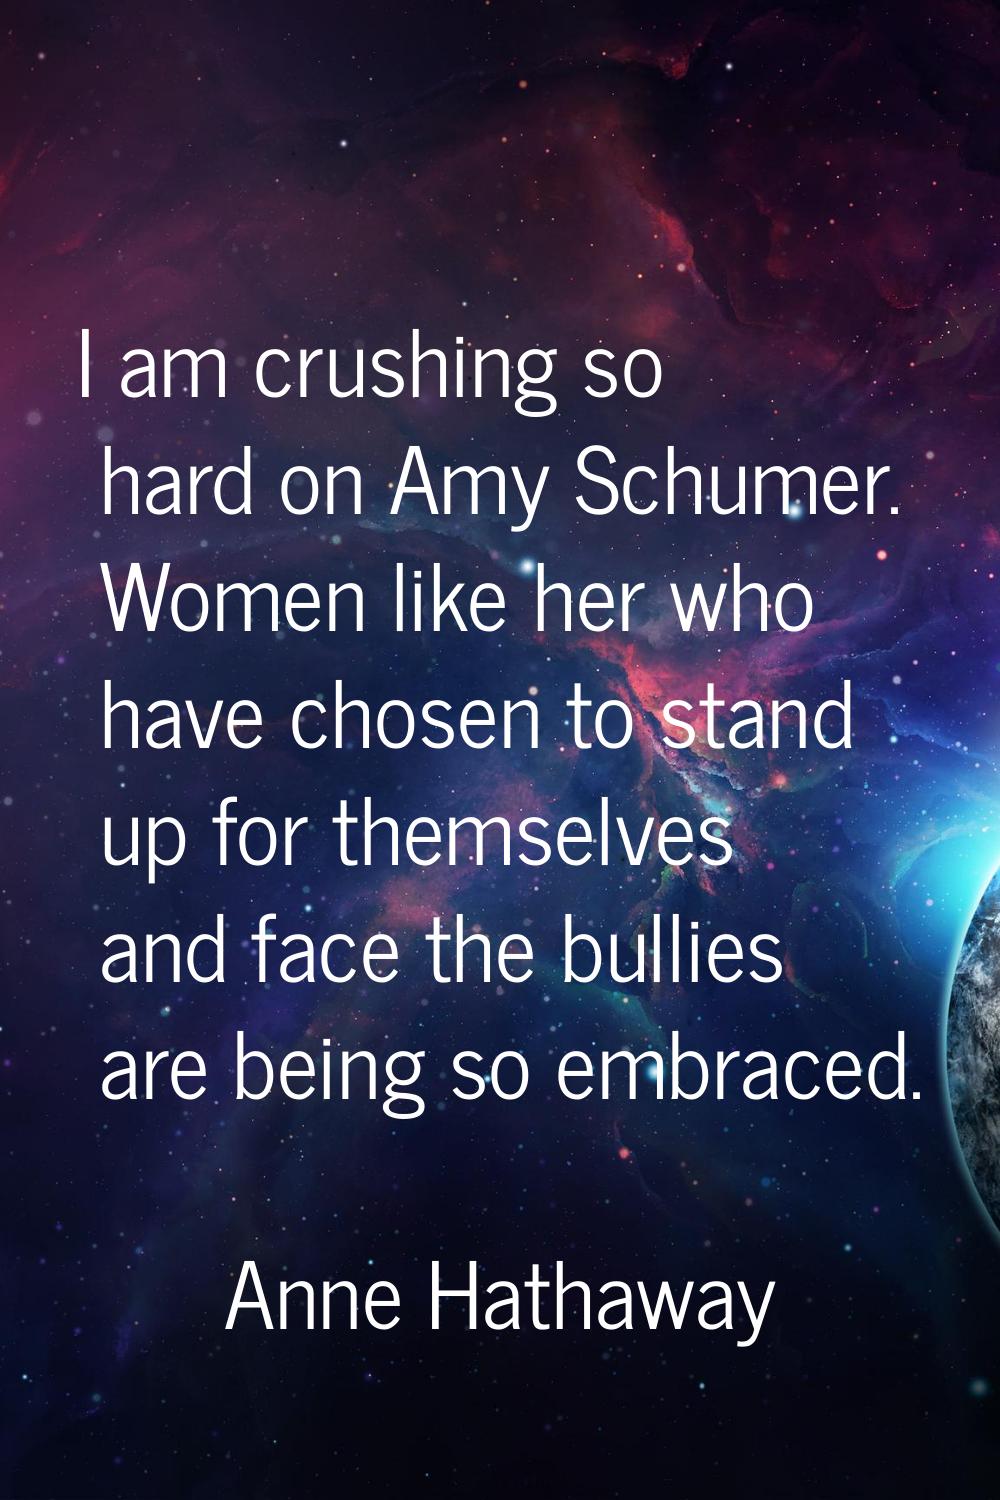 I am crushing so hard on Amy Schumer. Women like her who have chosen to stand up for themselves and